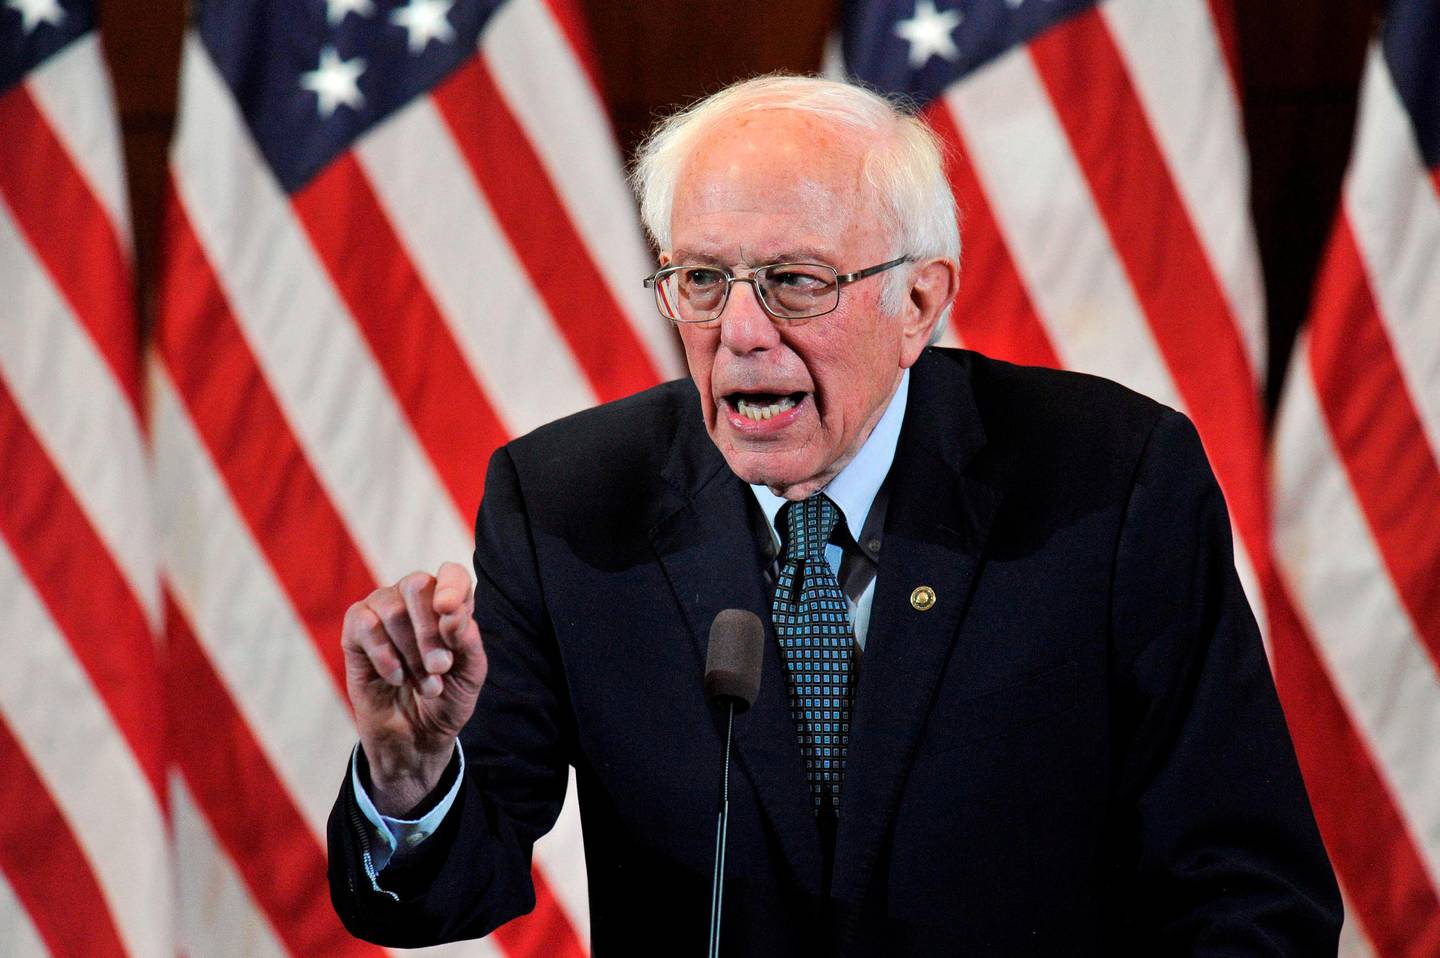 US Presidential Candidate and US Senator Bernie Sanders gives his response to US President Donald Trump's State of the Union speech to a room of supporters at the Currier Museum of Art Auditorium in Manchester, New Hampshire on February 4, 2020. - Democratic White House candidate Pete Buttigieg seized a shock lead in the chaotic Iowa caucuses, closely trailed by leftist senator Bernie Sanders, according to partial returns released on Tuesday after an embarrassing delay in reporting the results. (Photo by Joseph Prezioso / AFP)